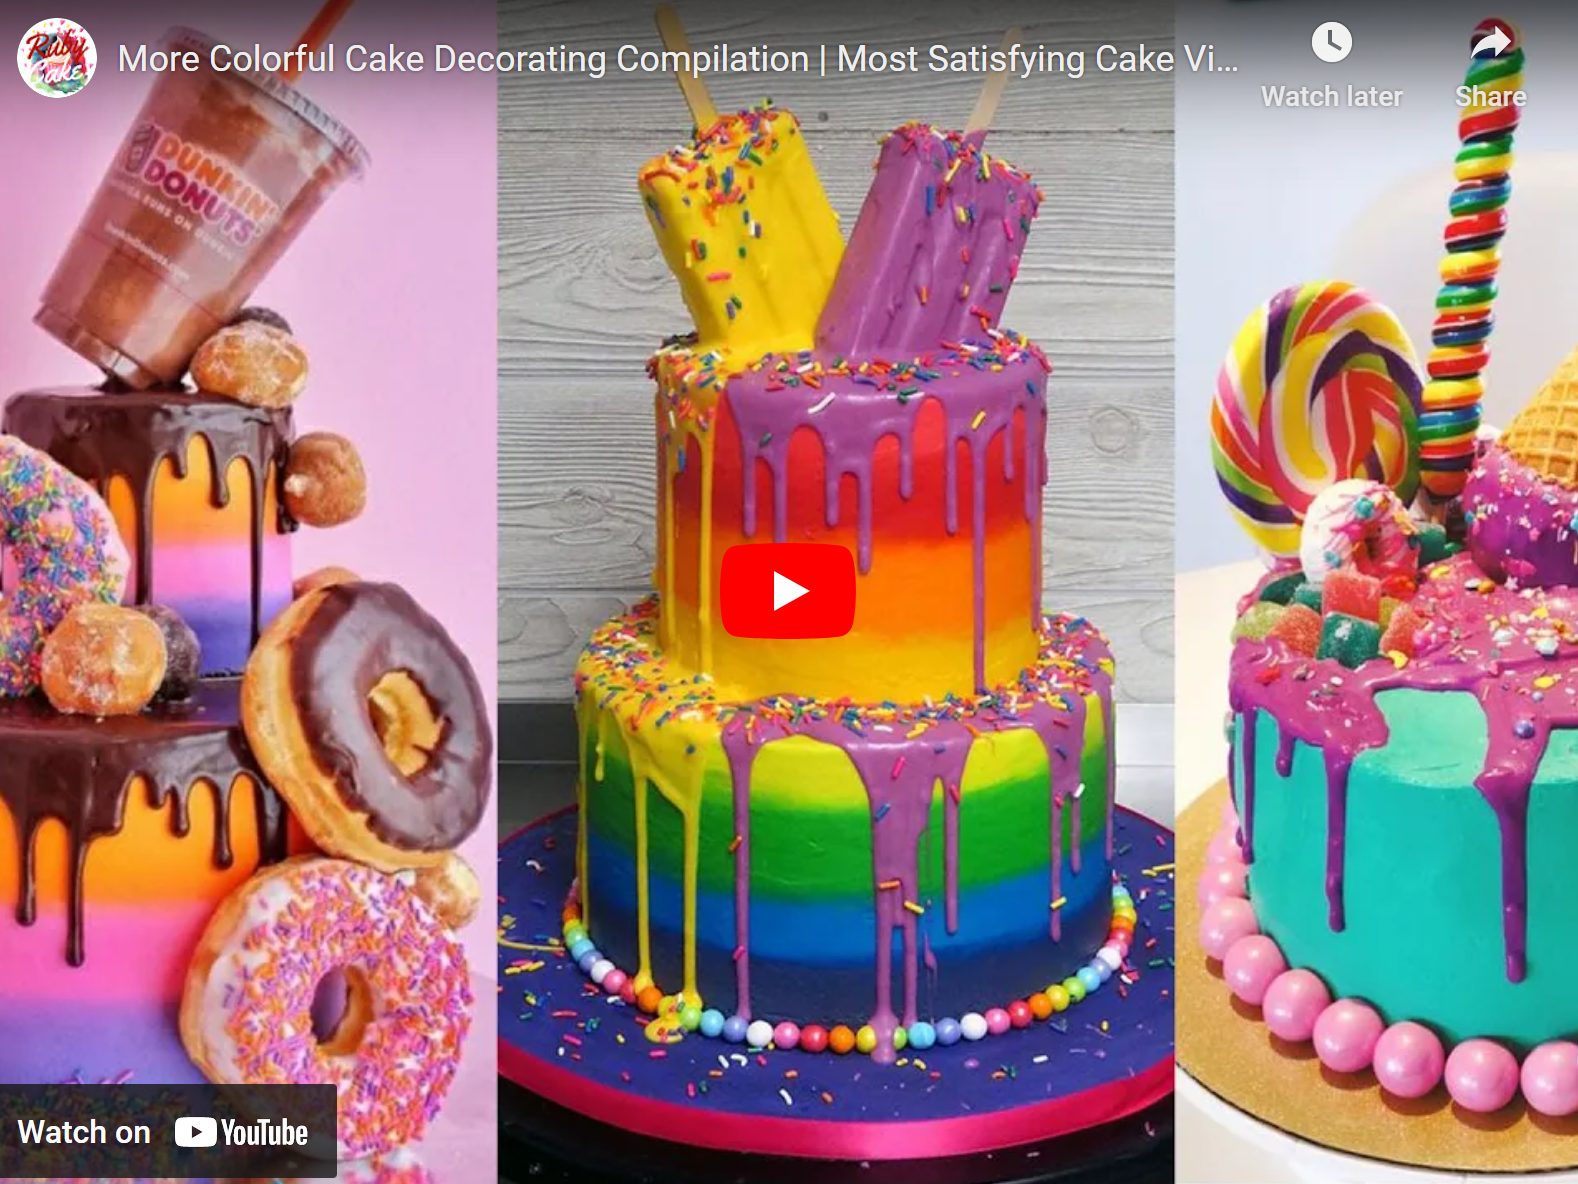 Colorful Cake Decorating Compilation